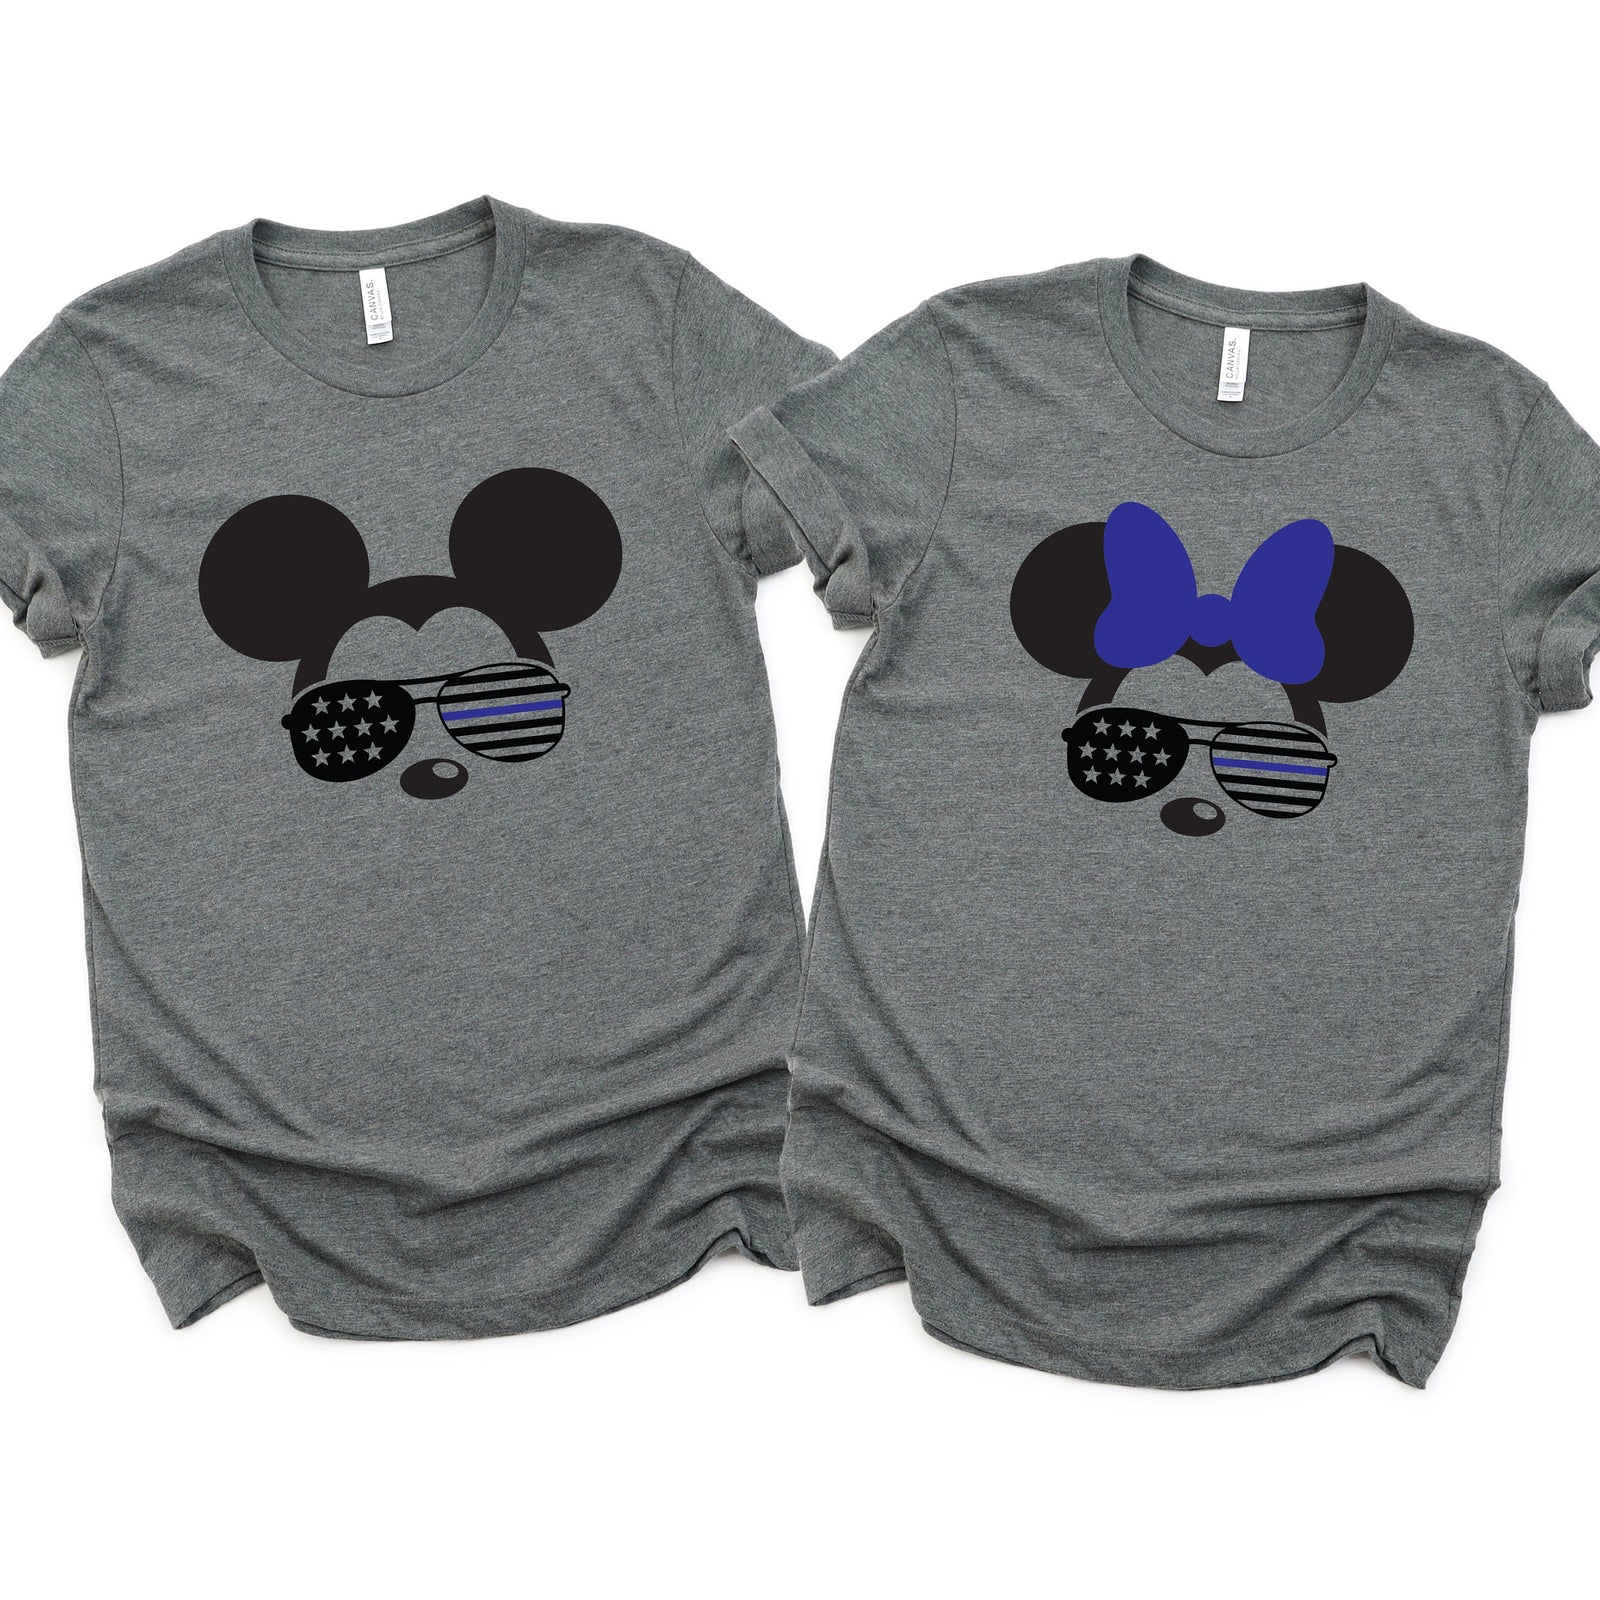 Minnie and Mickey Police Shirts - Disney Couples - Matching Shirts - Blue Line Minnie and Mickey - Disney Police - Stars and Stripes Glasses